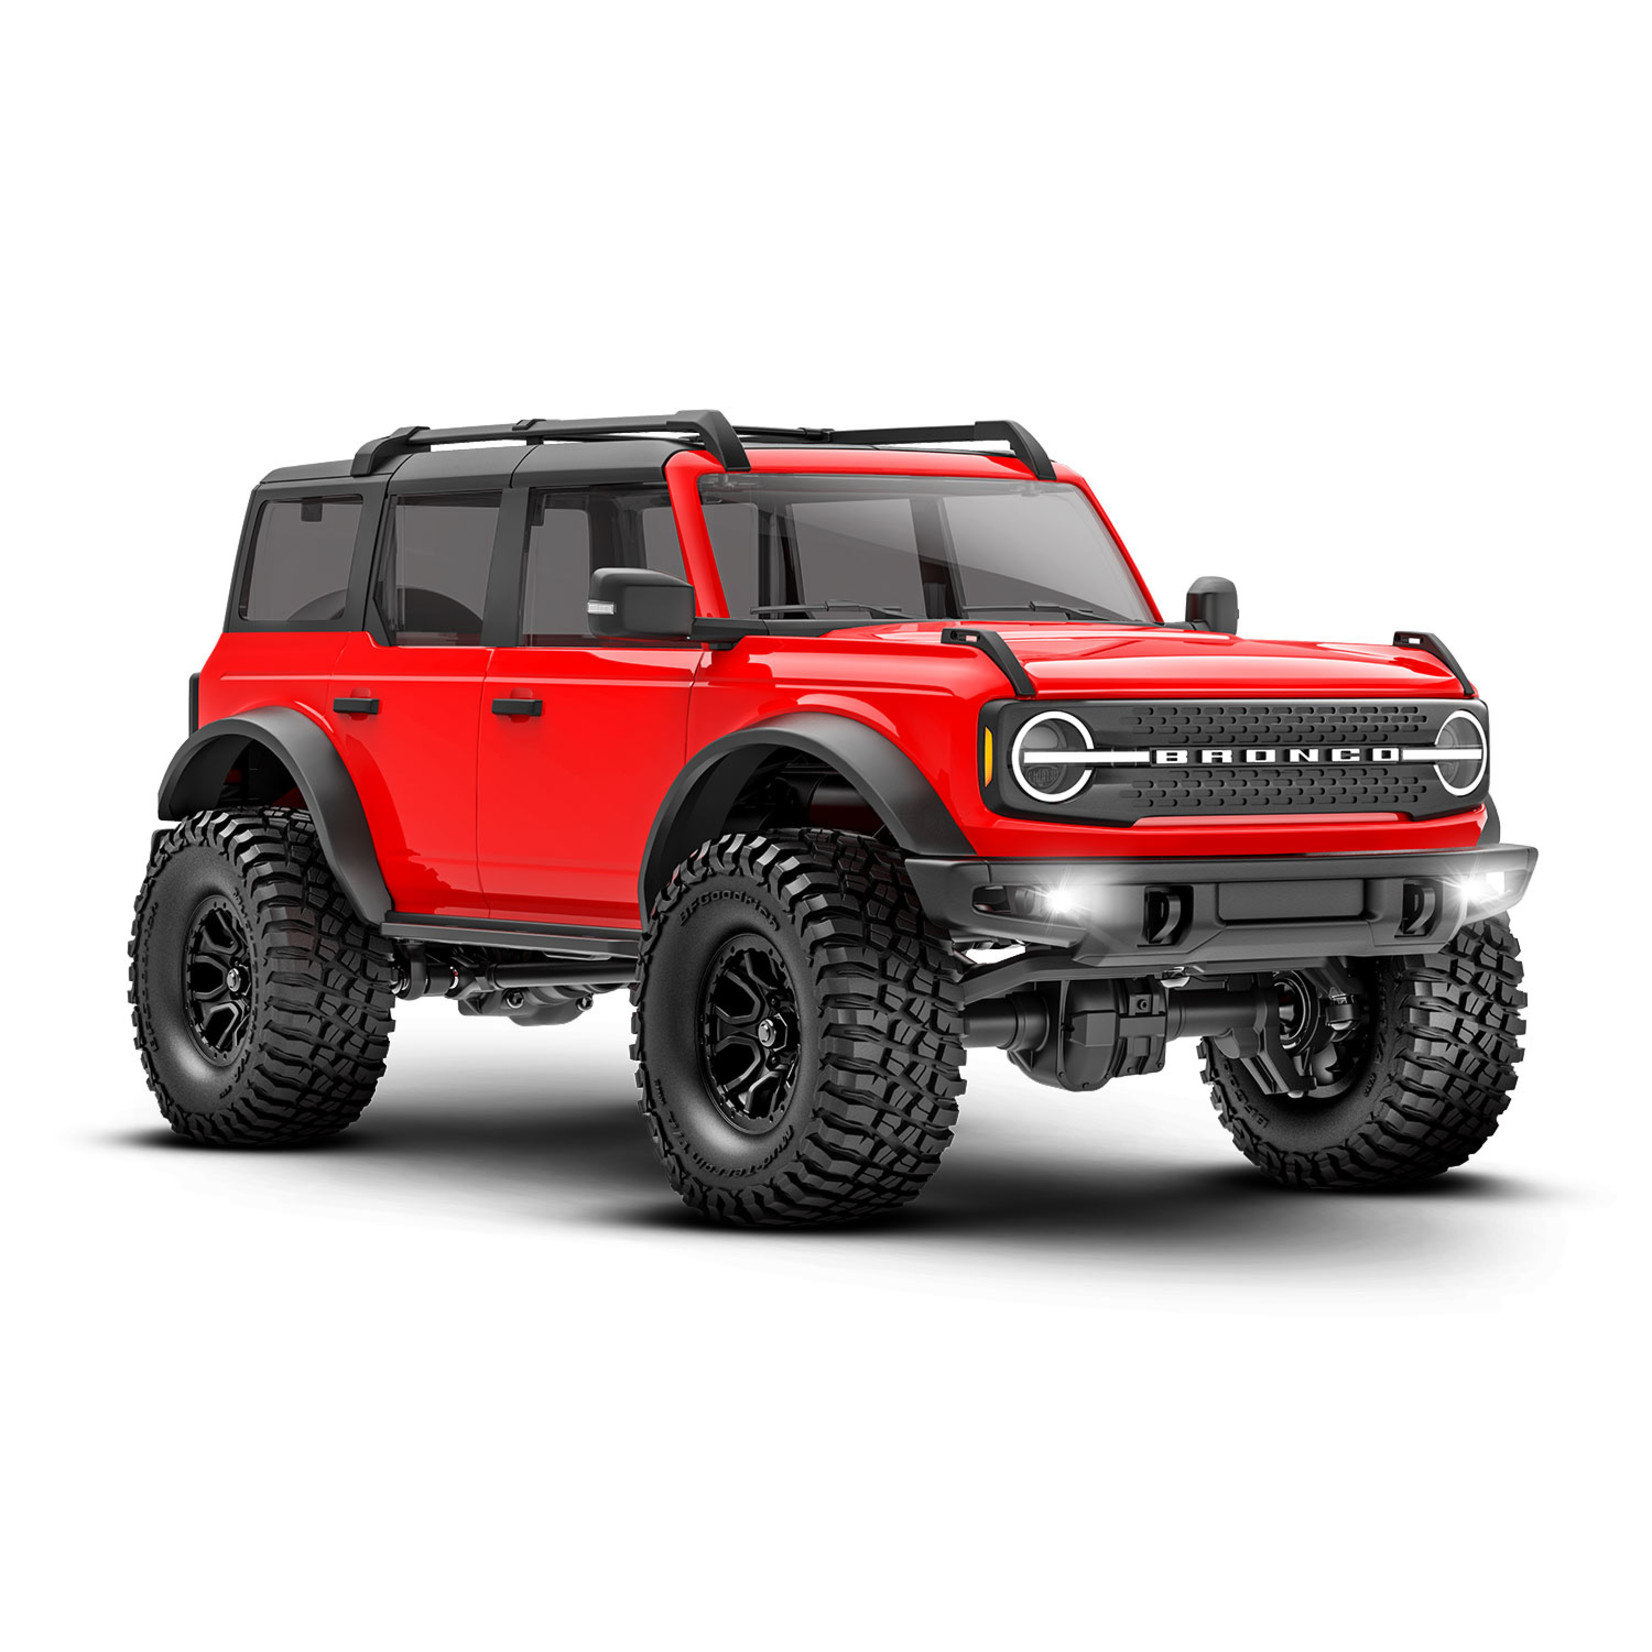 Traxxas TRX-4m Scale and Trail Crawler with Ford Bronco Body: 1/18 Scale 4WD Electric Crawler Truck with750 mAh 2-Cell LiPo Battery and USB-powered charger